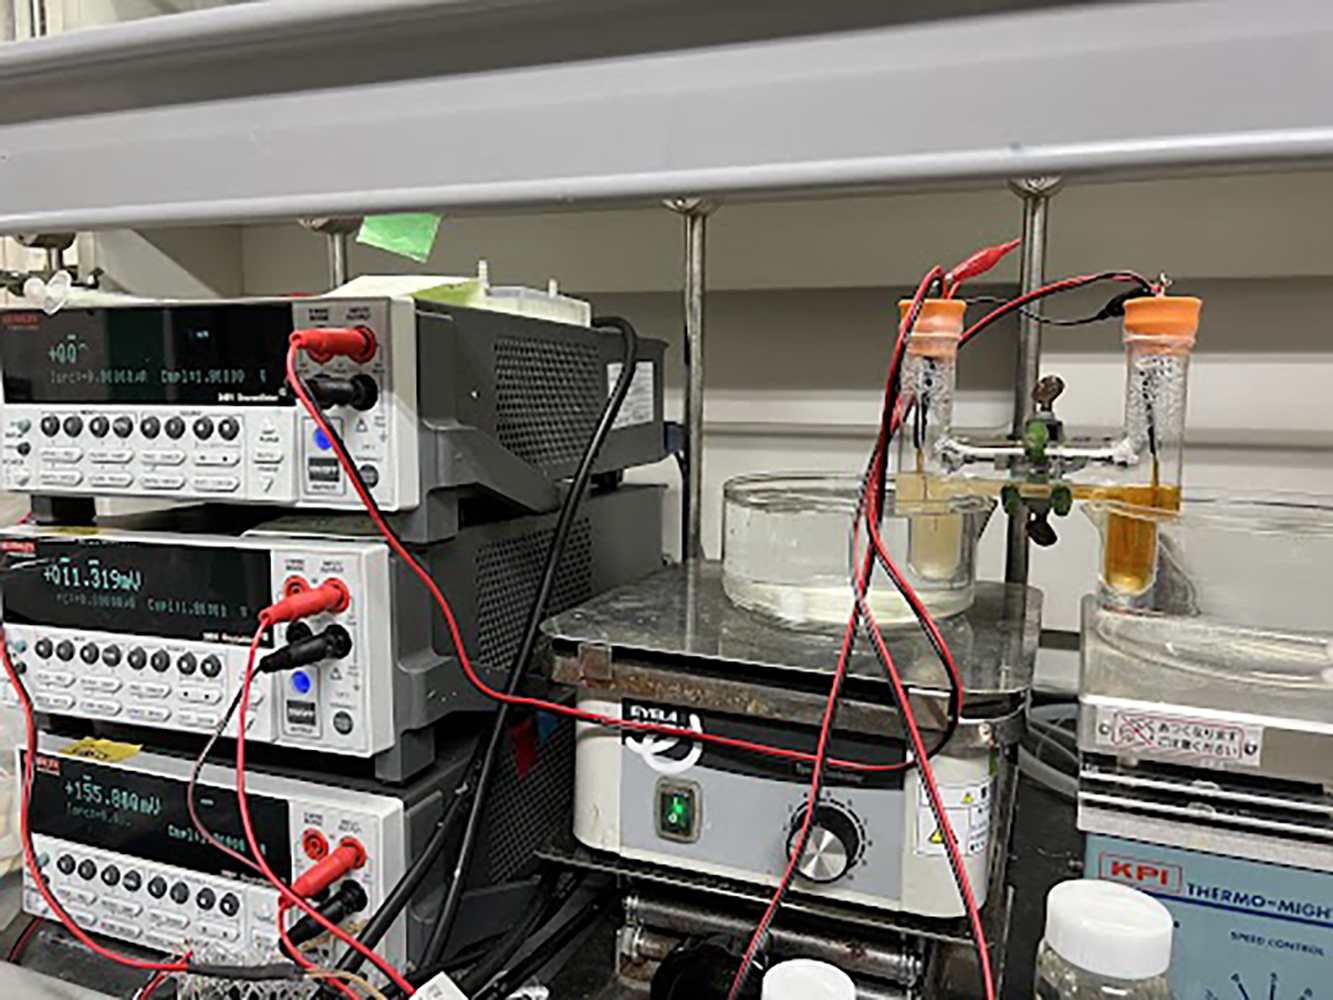 Photograph of the experimental thermocell setup in the lab.